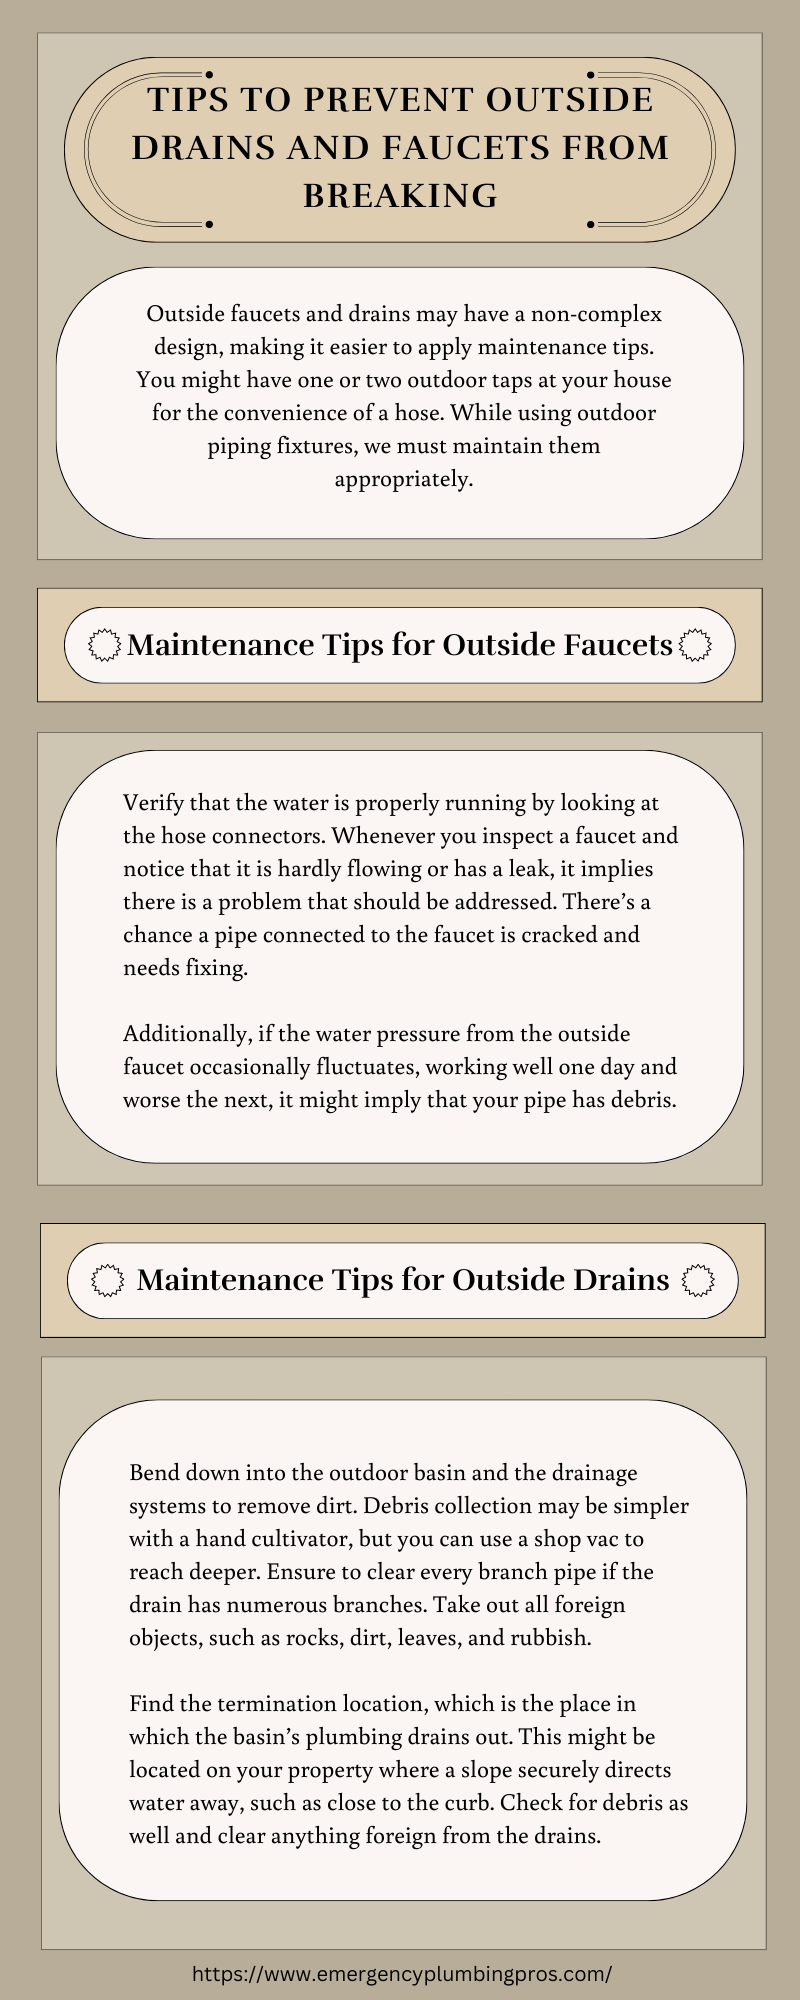 Tips to Prevent Outside Drains and Faucets from Breaking